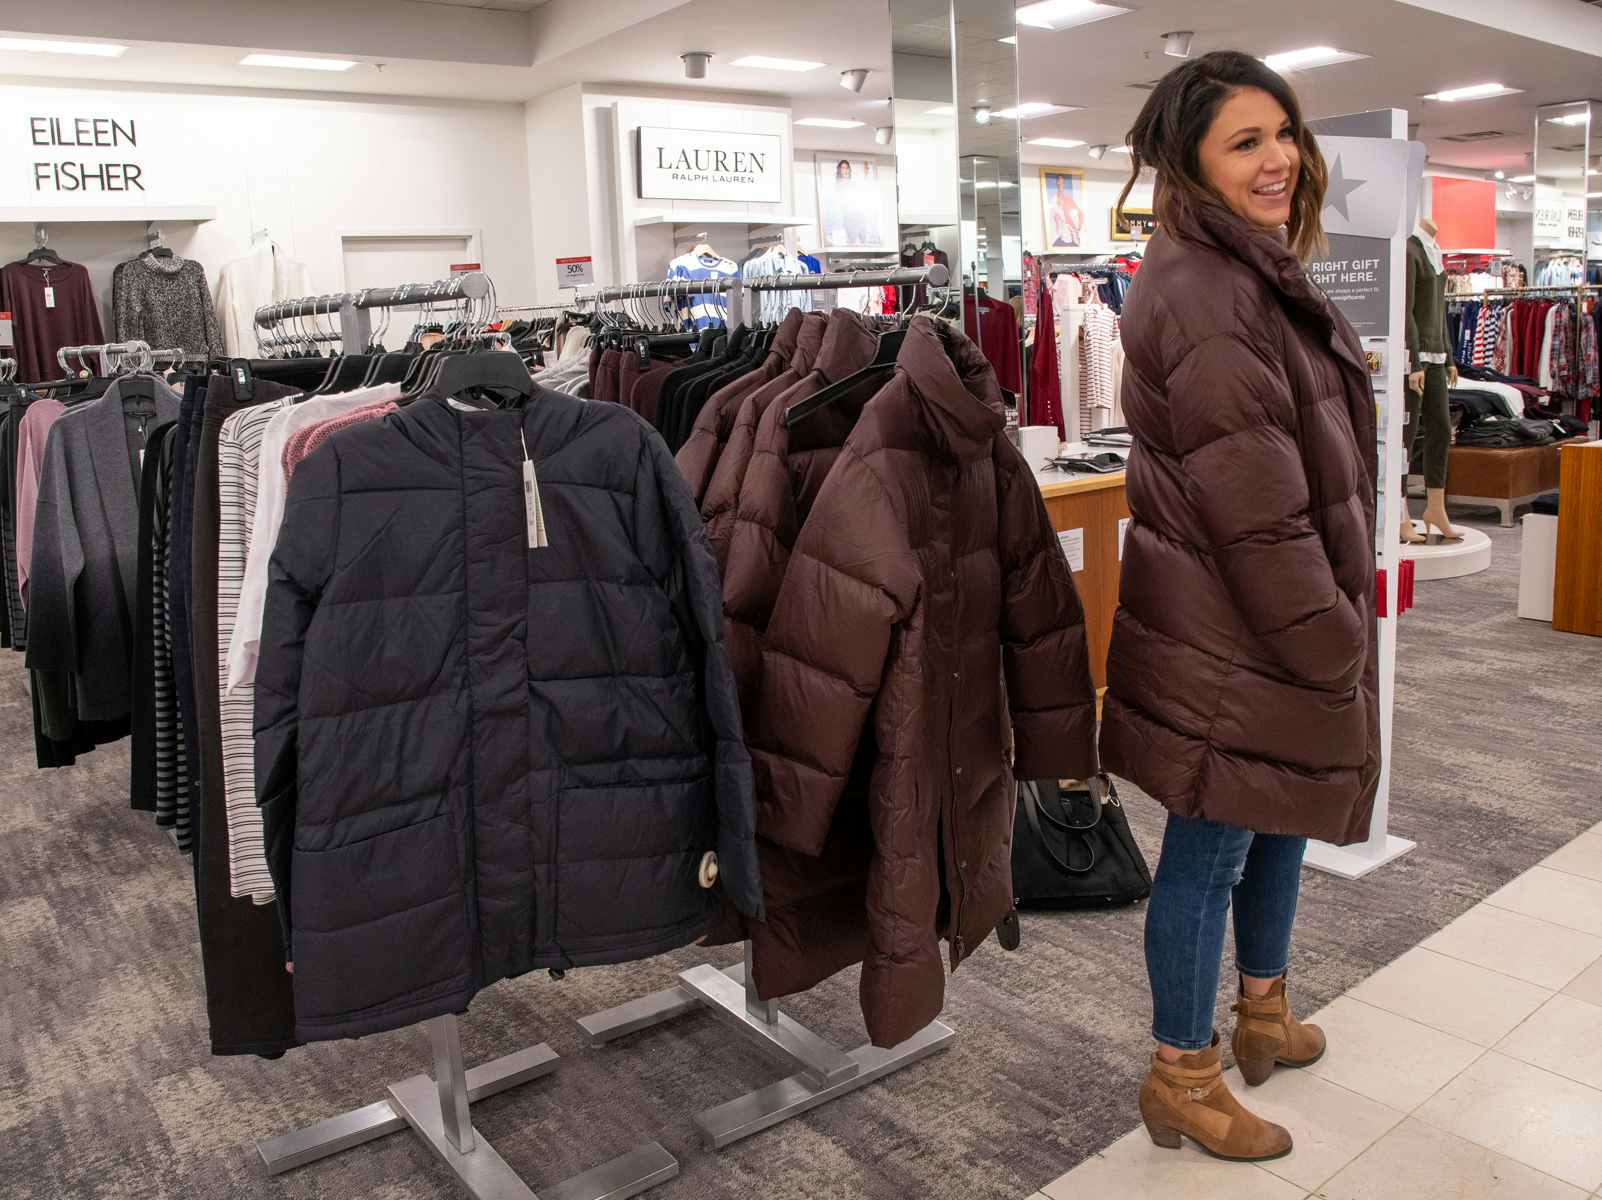 A woman trying on a winter coat in a department store.